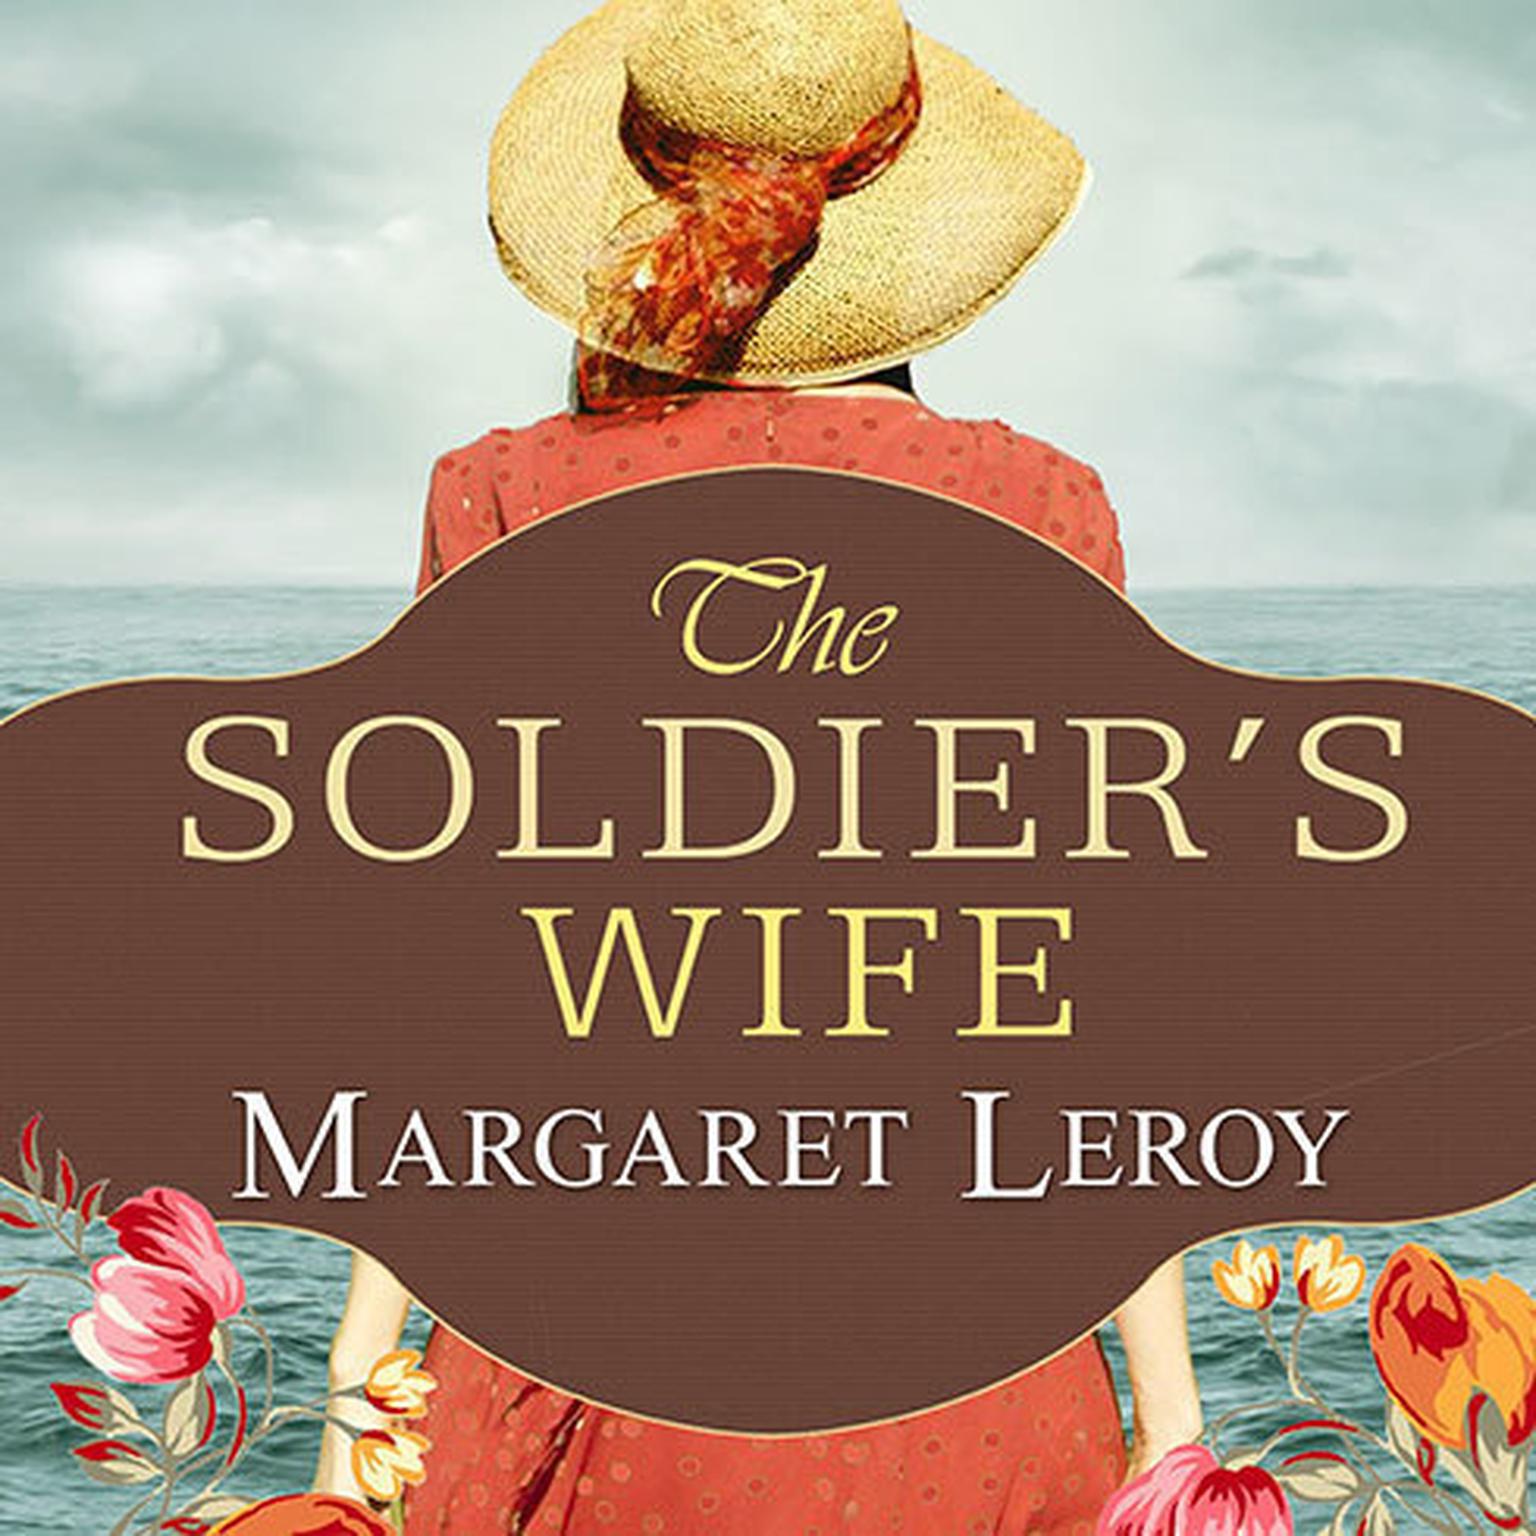 The Soldiers Wife: A Novel Audiobook, by Margaret Leroy